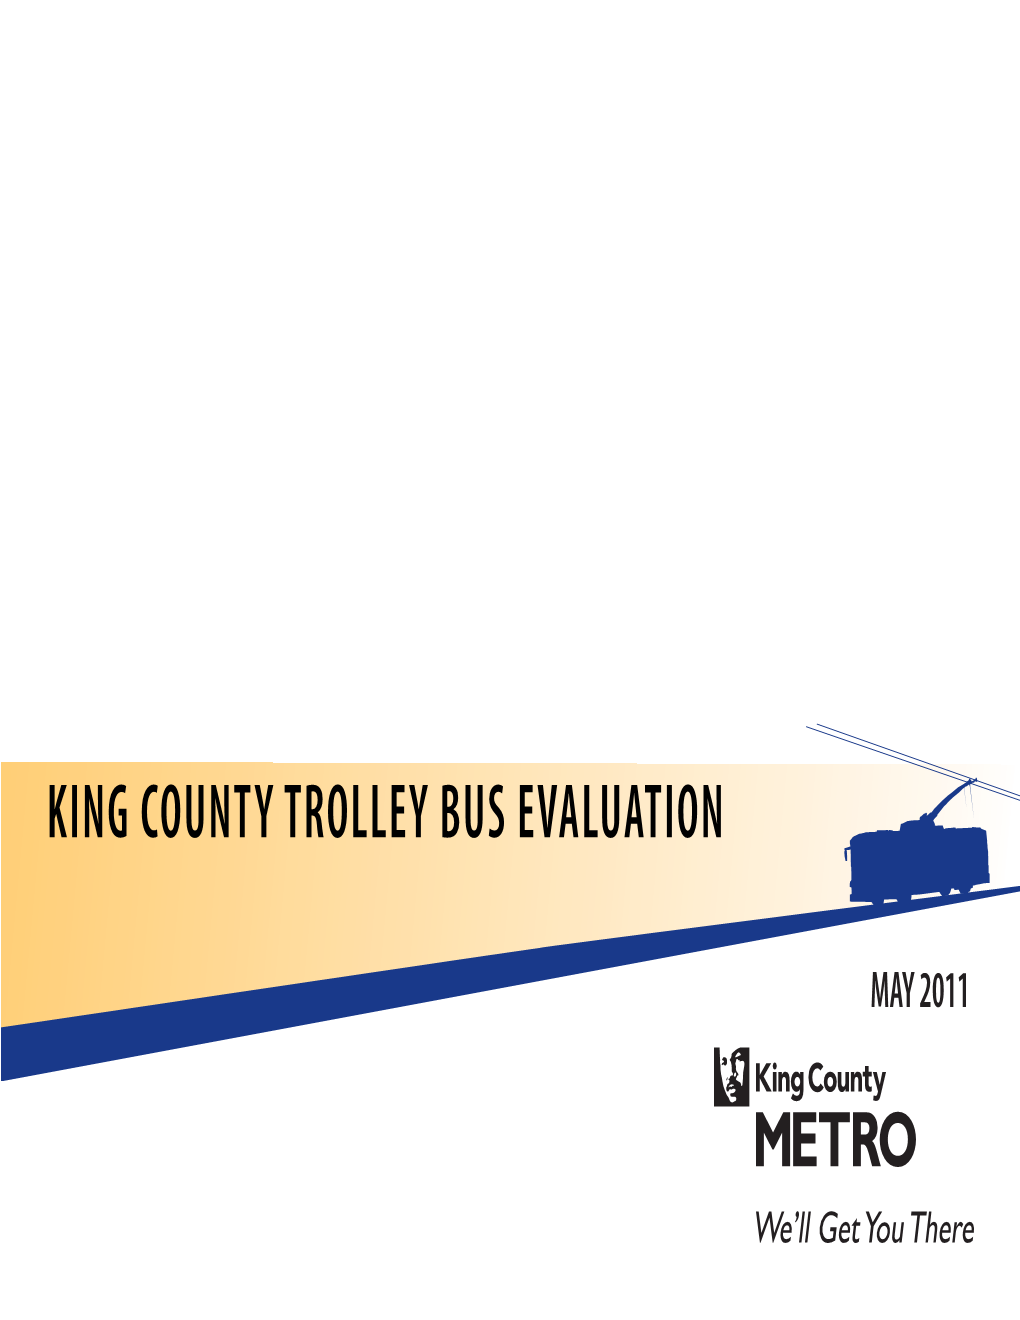 King County Trolley Bus Evaluation